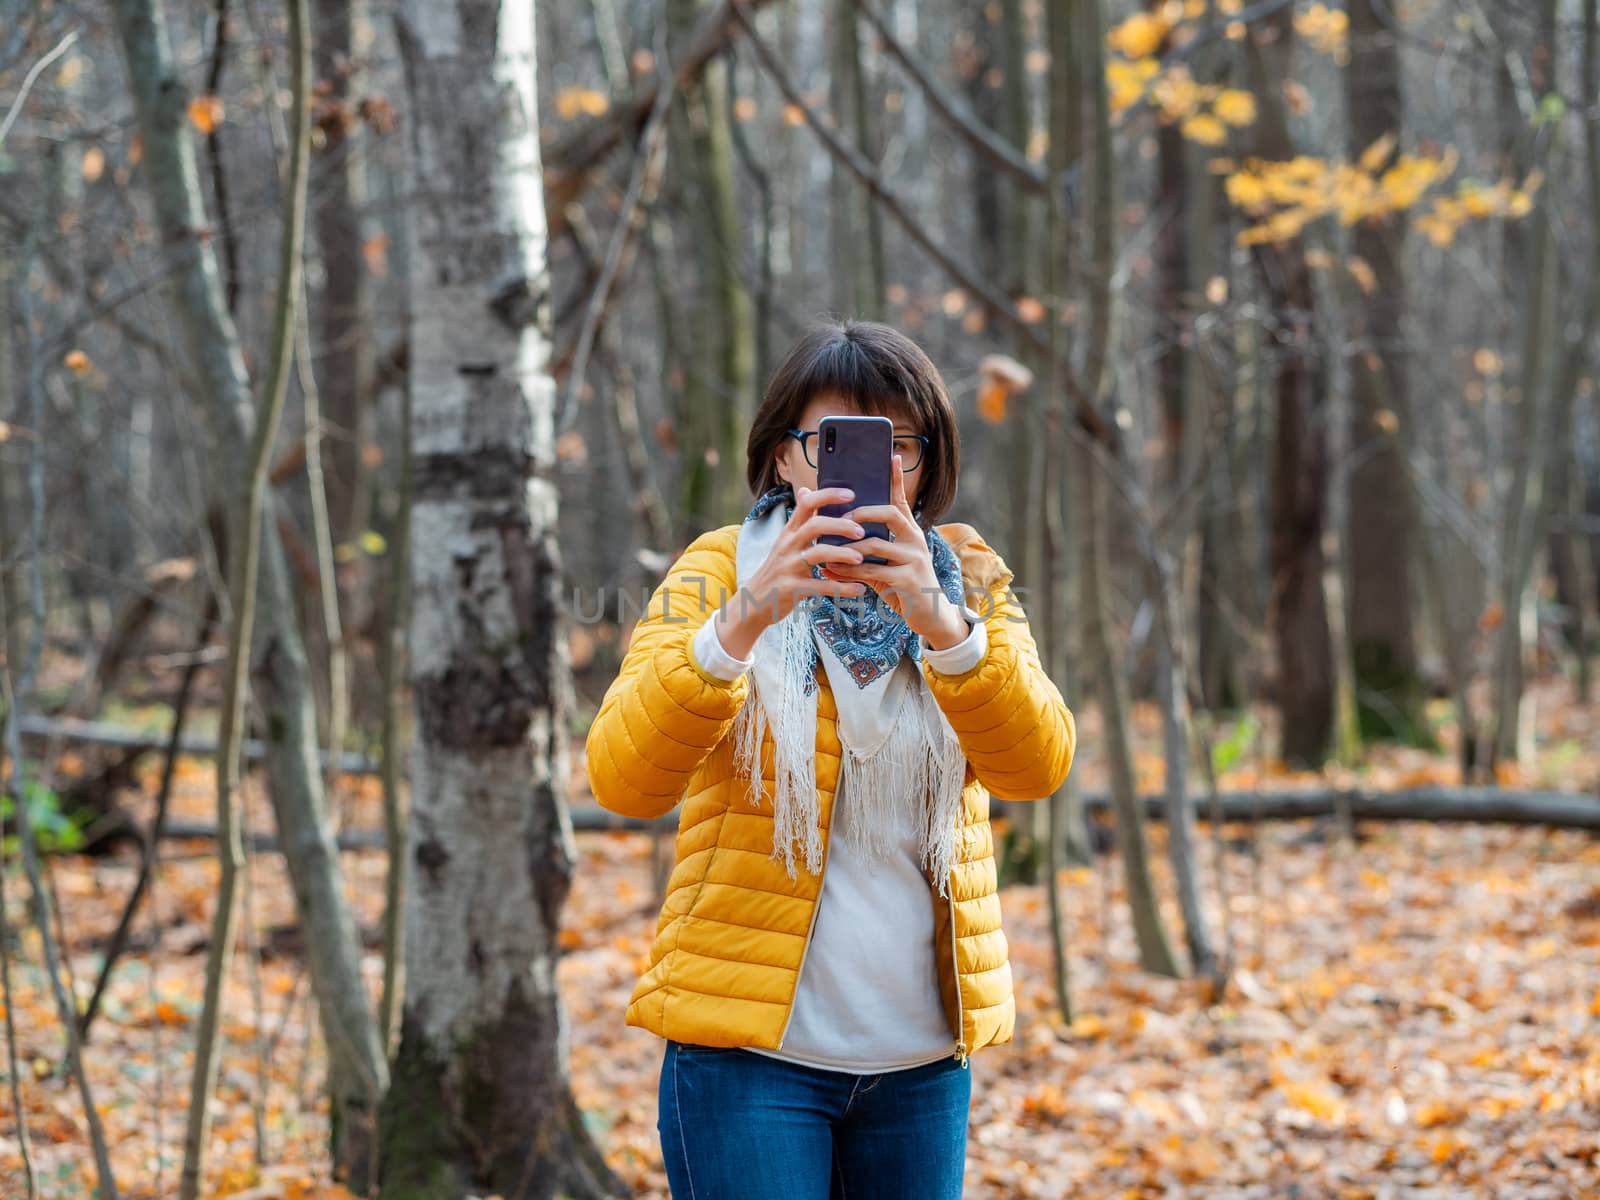 Woman in bright yellow jacket with smartphone. Young girl with wide smile walking and taking pictures of autumn forest.